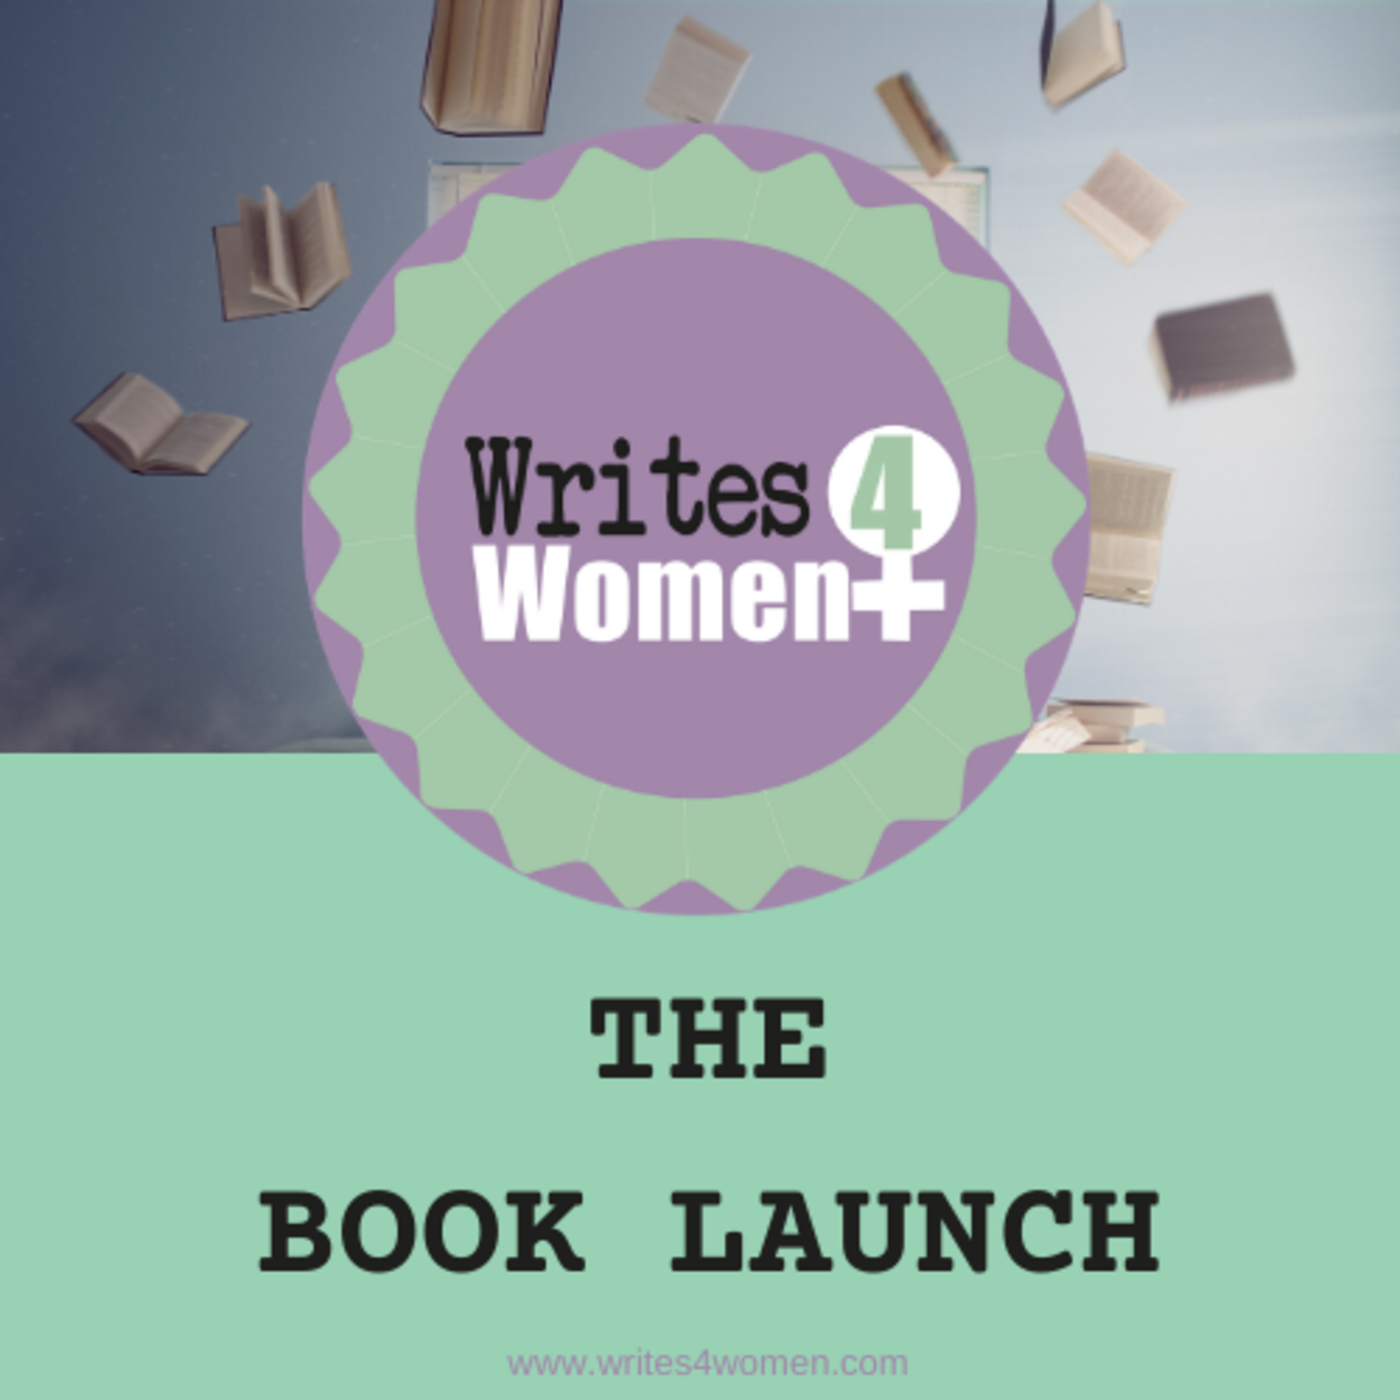 W4W BOOK LAUNCH - Louise Merrington "The Light at the Edge of the World and Other Stories"